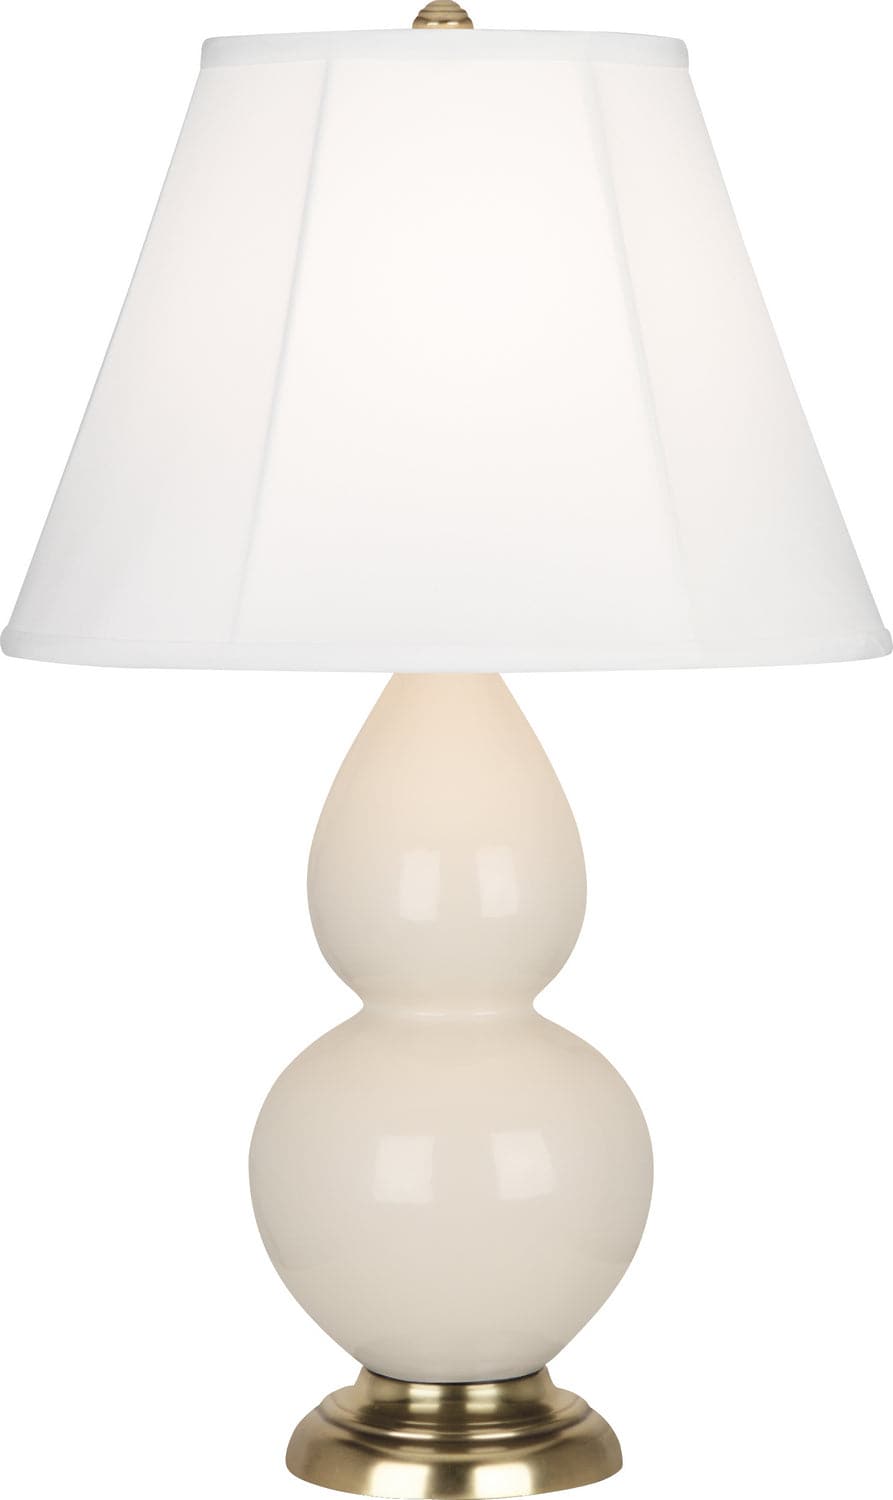 Robert Abbey - 1774 - One Light Accent Lamp - Small Double Gourd - Bone Glazed